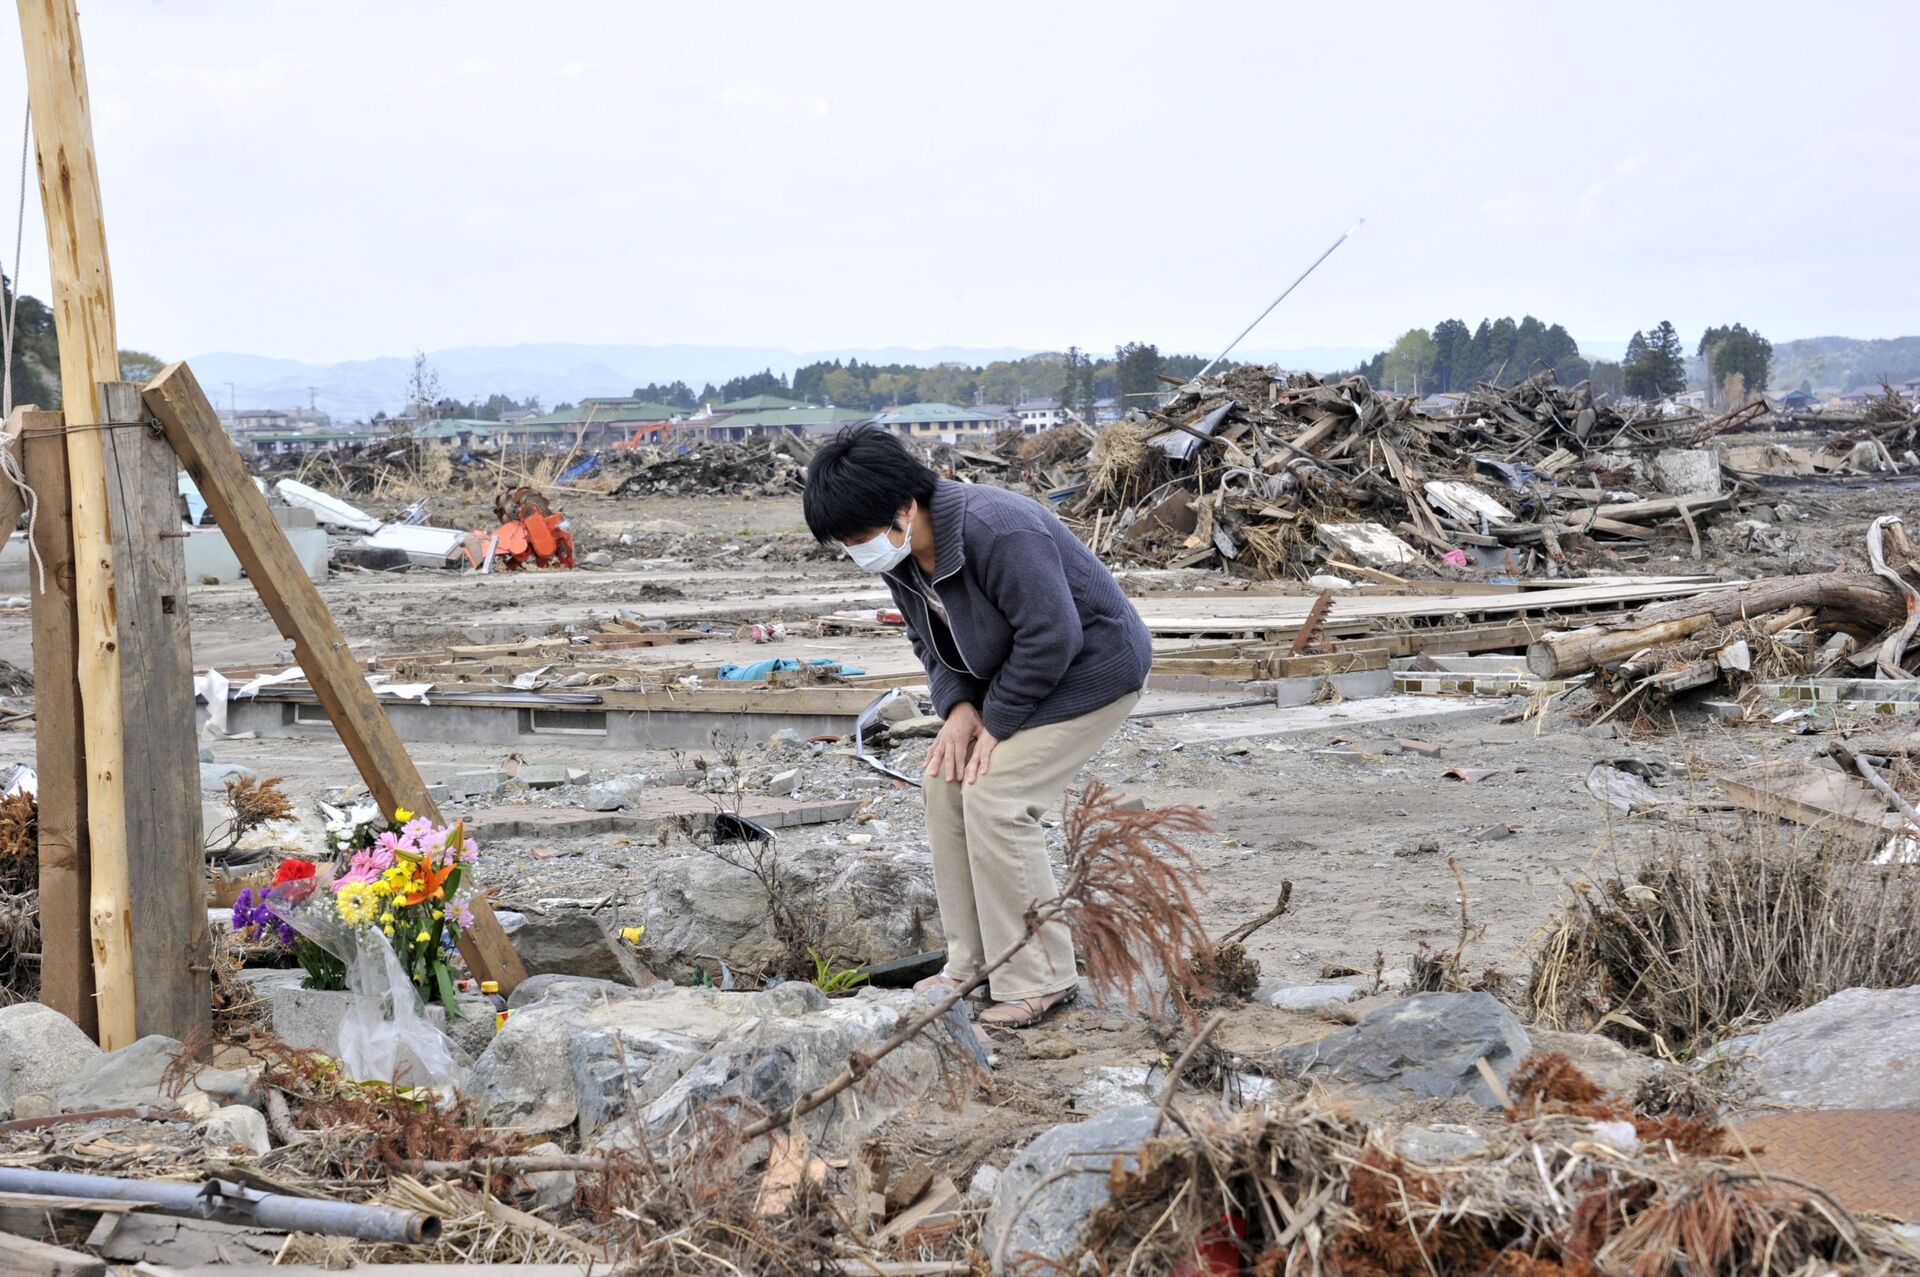 Japan’s Ghosts: Traces of 'Confused' Tsunami Victims or Way For Survivors to Cope With Trauma? - Sputnik International, 1920, 11.03.2021